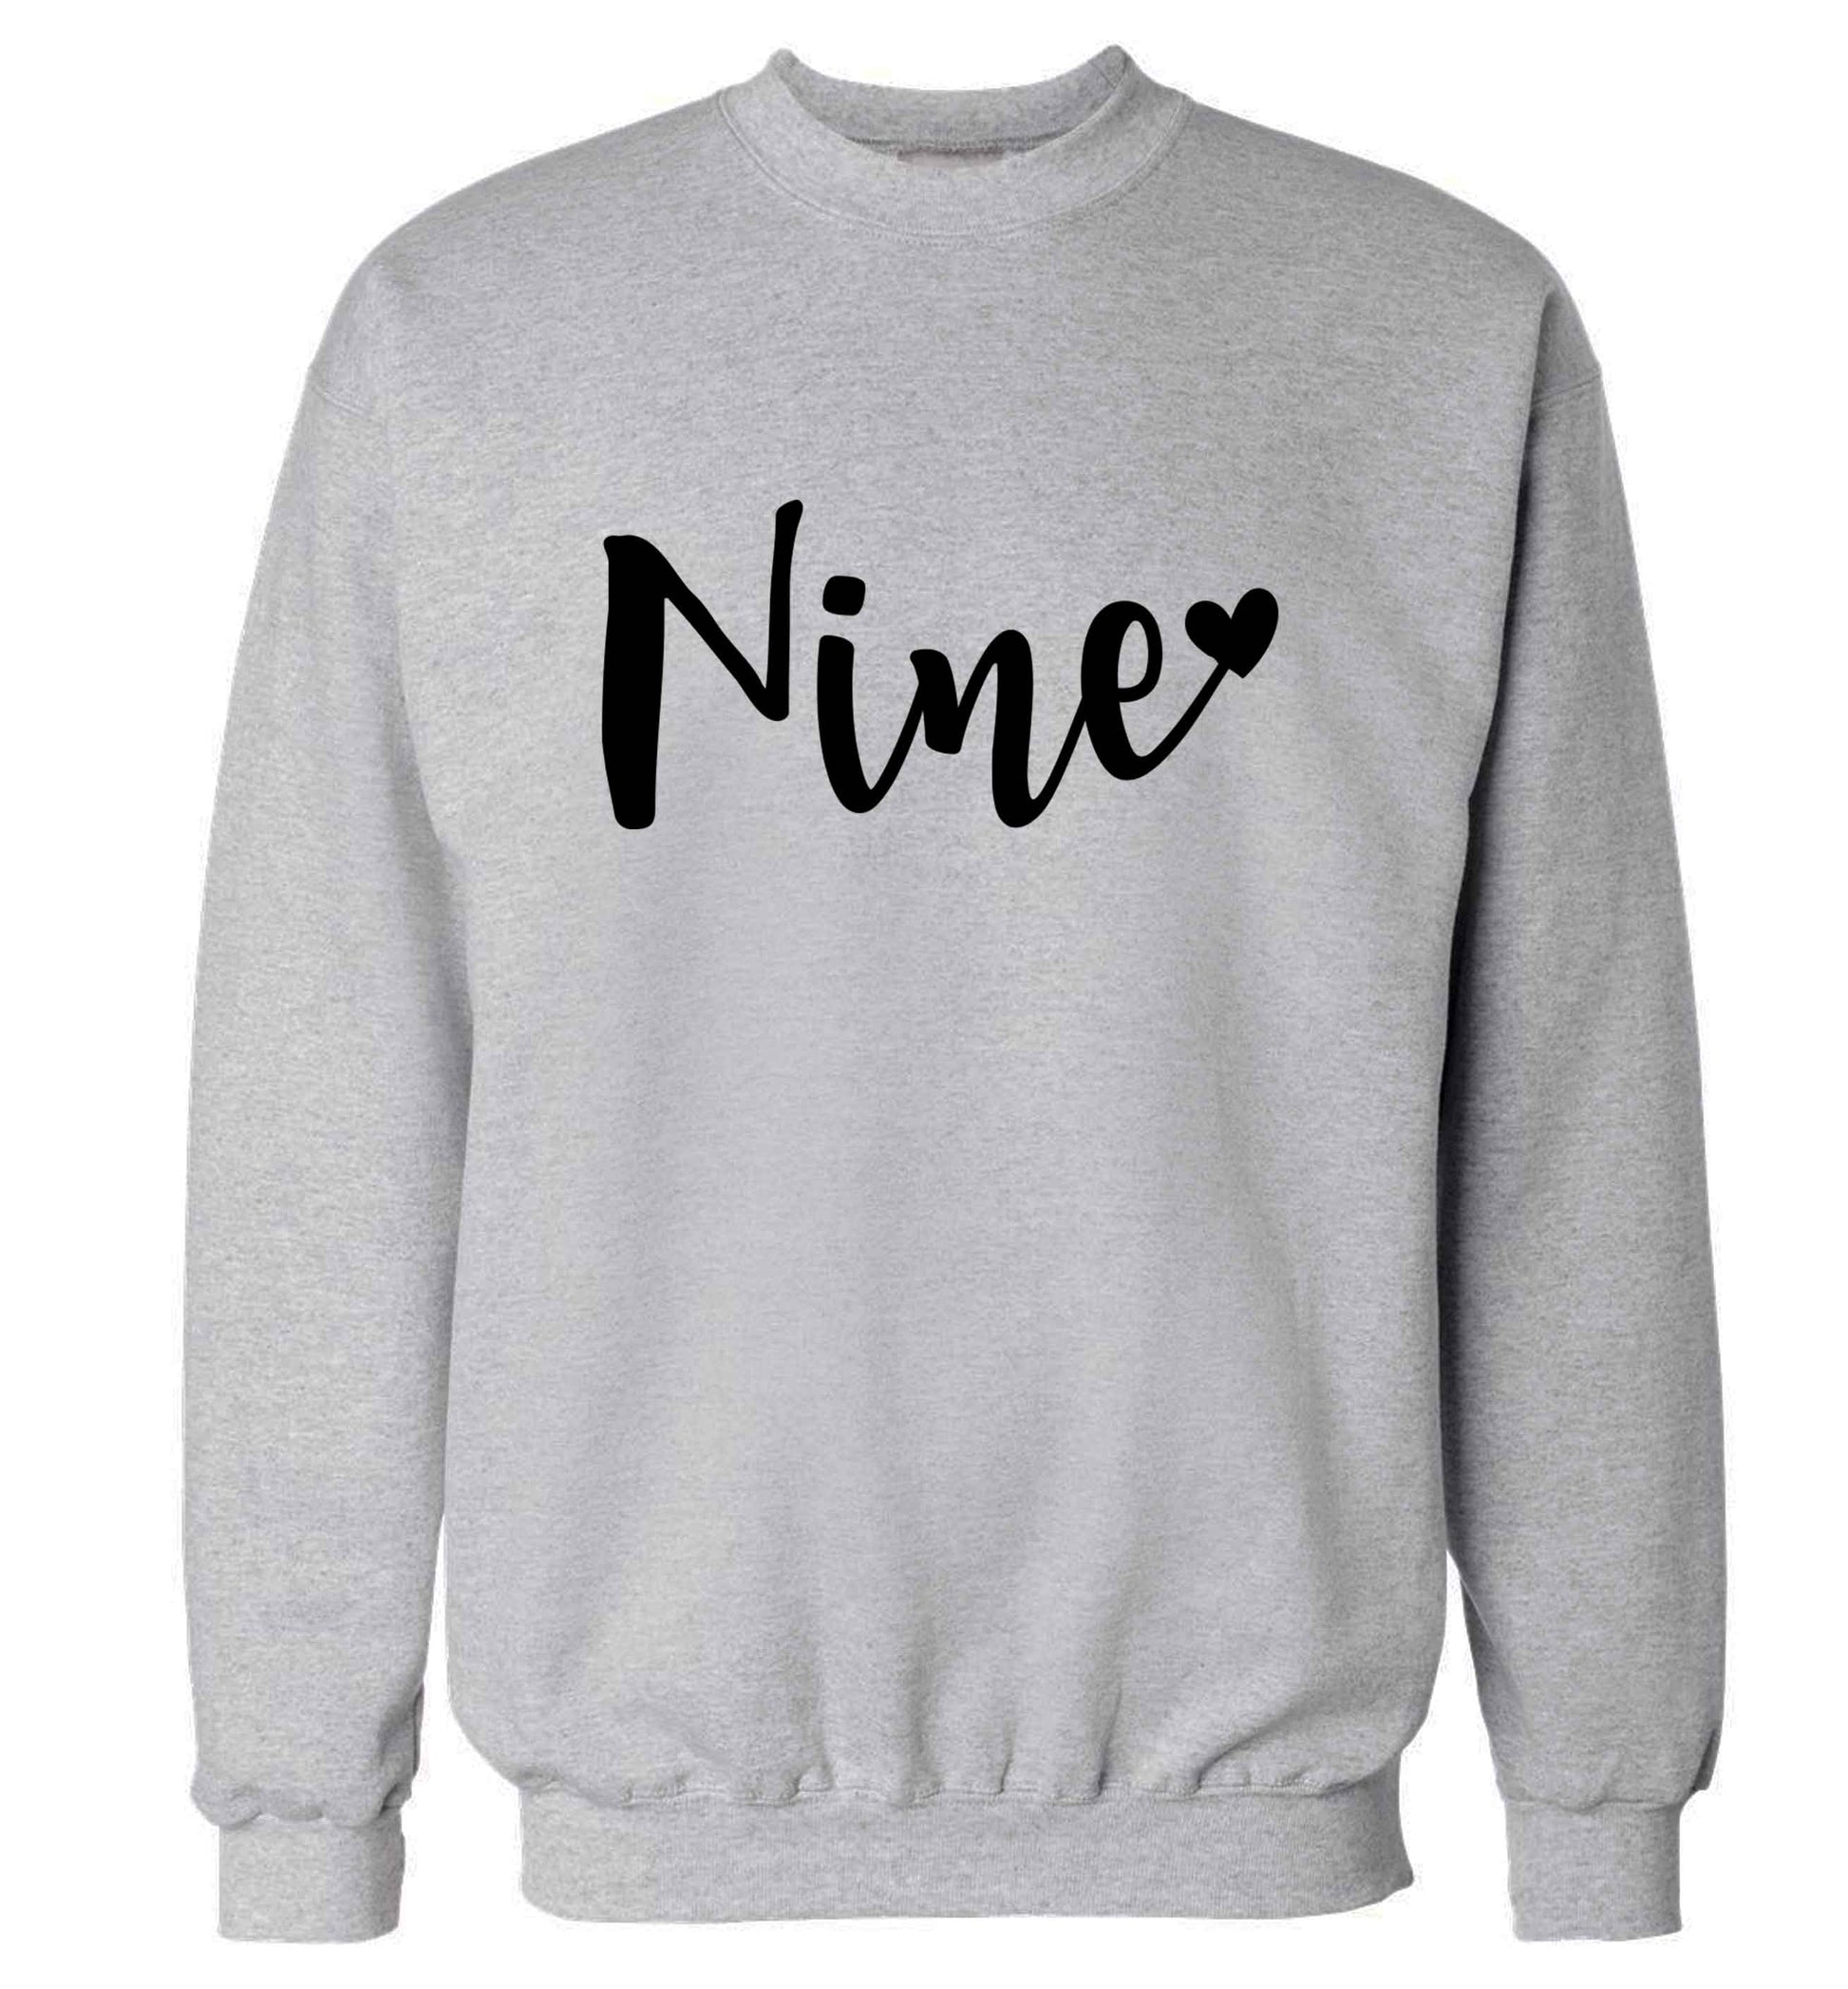 Nine and heart adult's unisex grey sweater 2XL